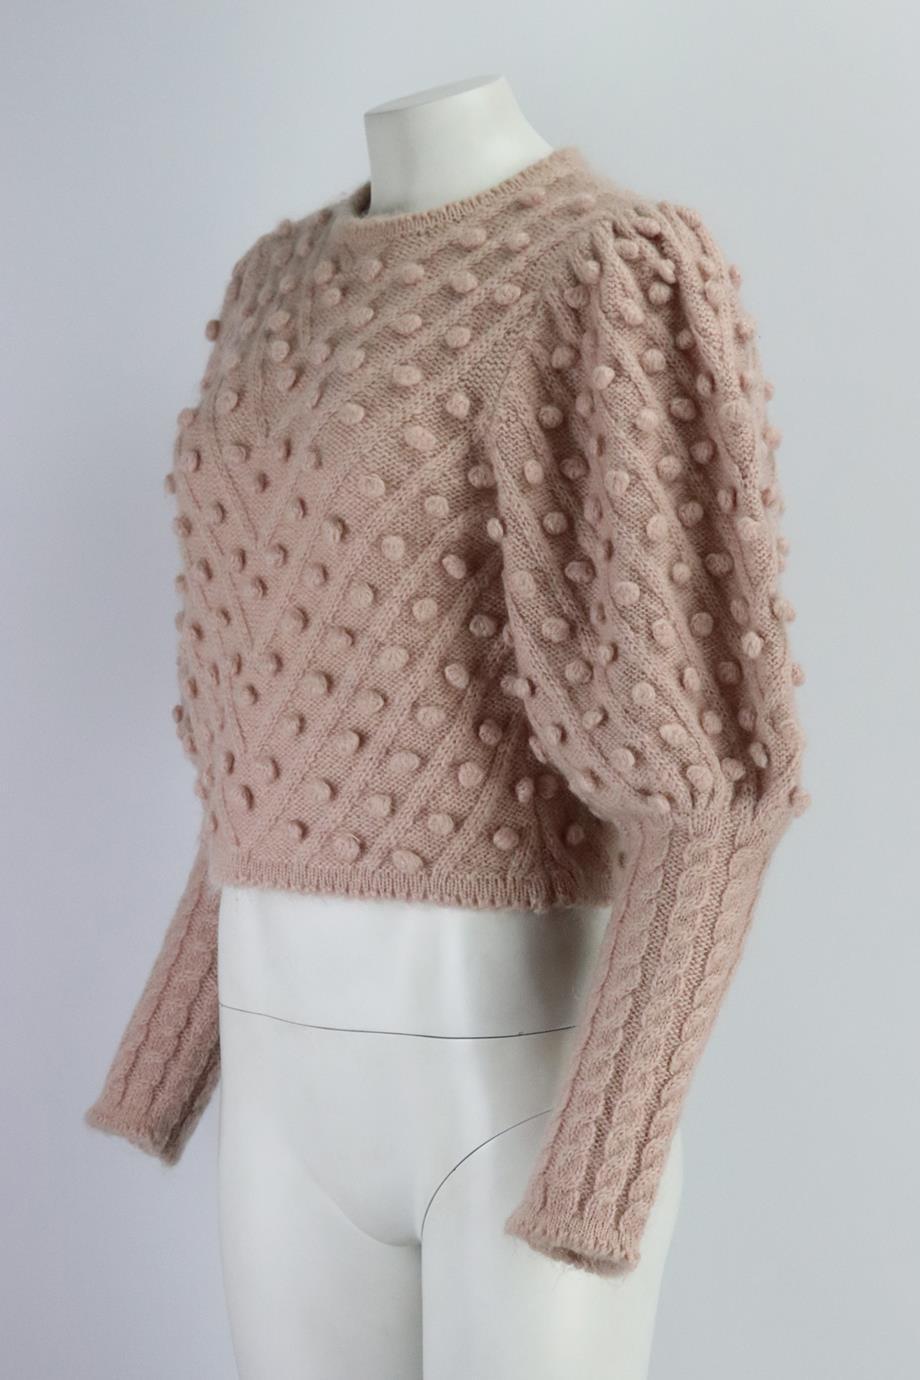 Zimmermann cable knit wool blend sweater. Made from pink cable-knit with wool and mohair with baubles. Pink. Slips on. 41% Polyamide, 34% wool, 25% mohair. Size: 3 (UK 14, US 10, FR 42, IT 46). Bust: 35.5 in. Waist: 33 in. Hips: 33.5 in. Length: 18